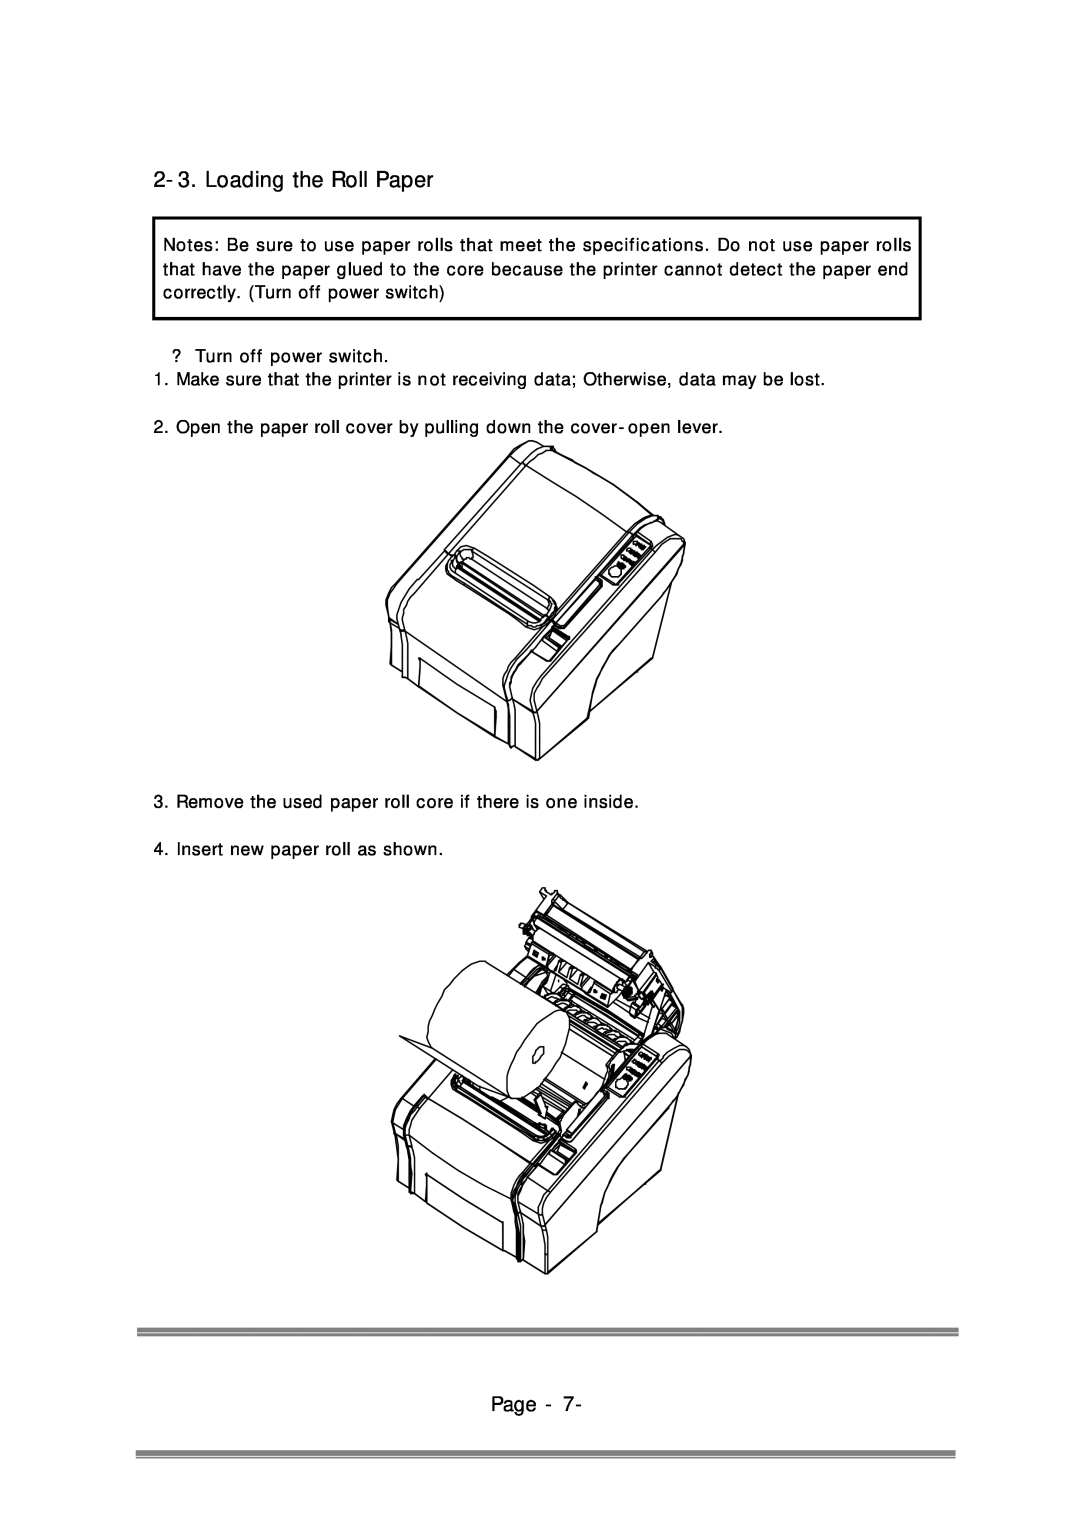 Epson RP-300, RP-310 user manual Loading the Roll Paper, Page 